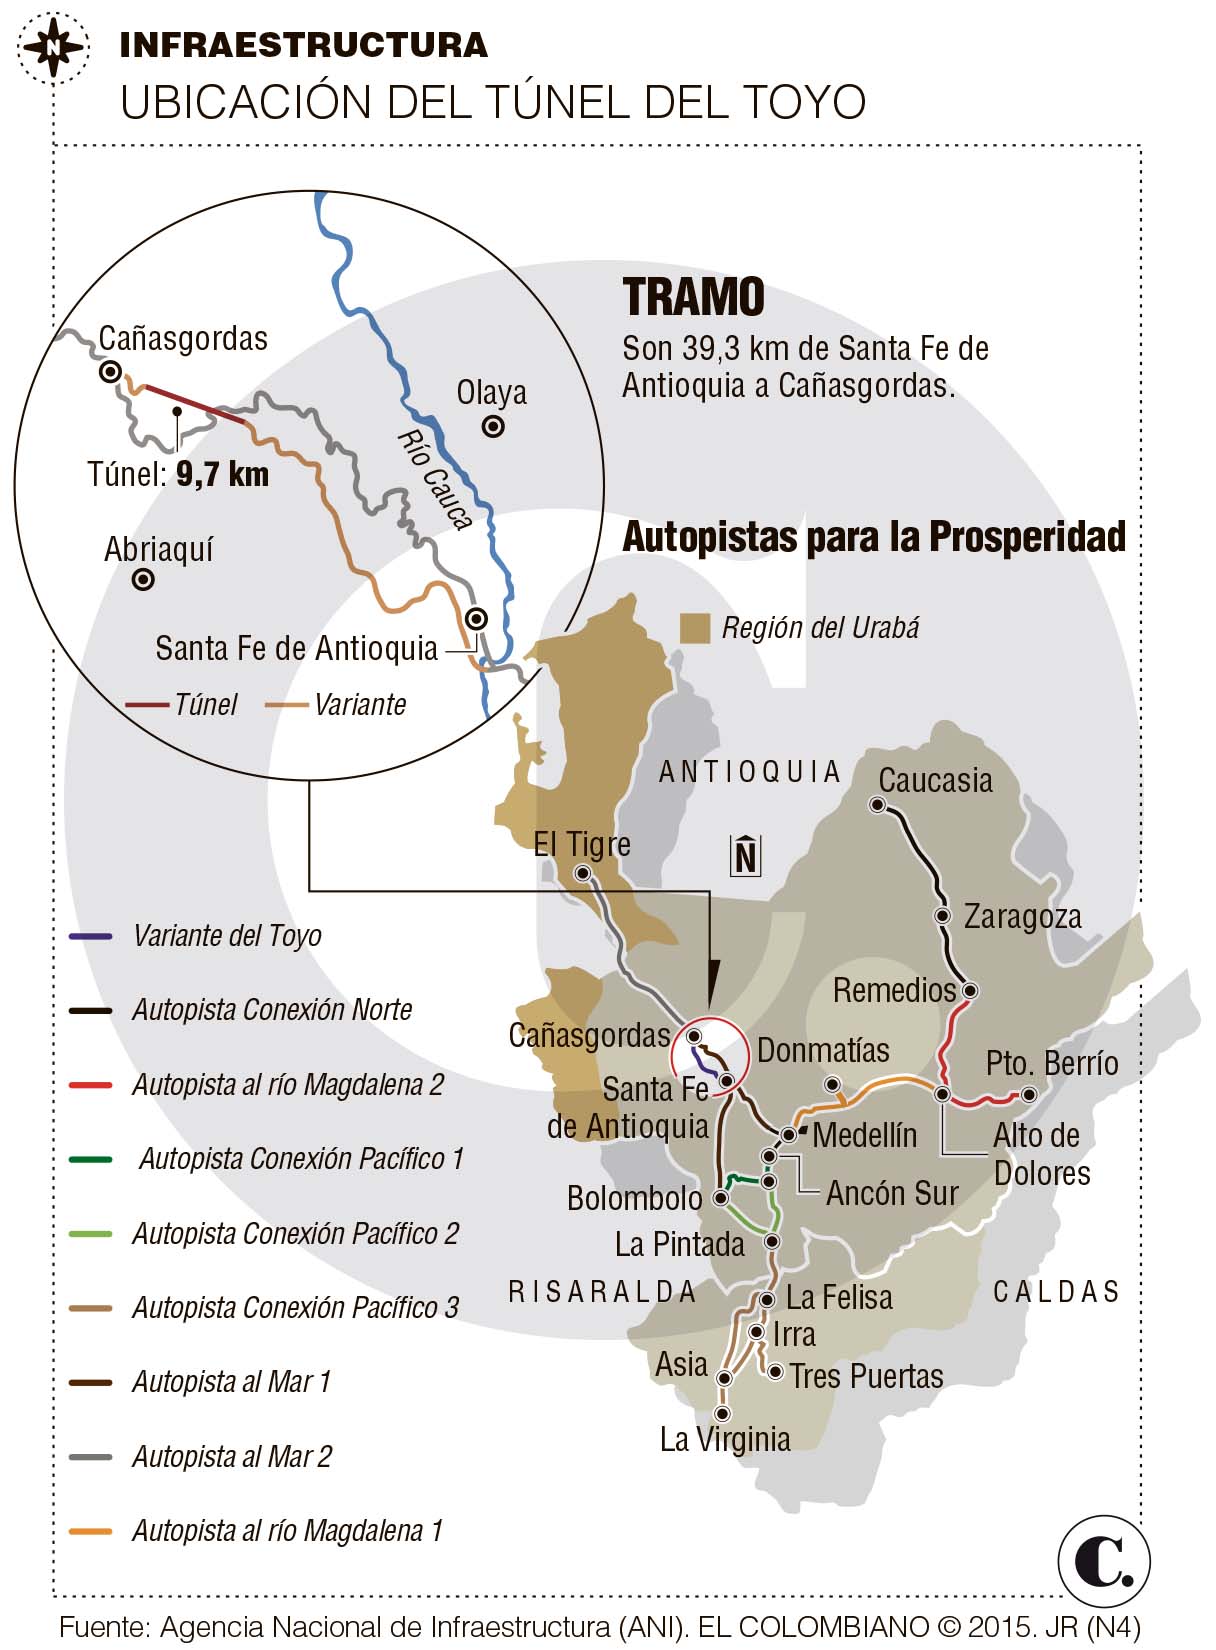 FCC to construct the Toyo tunnel project in Colombia for 392 million euros